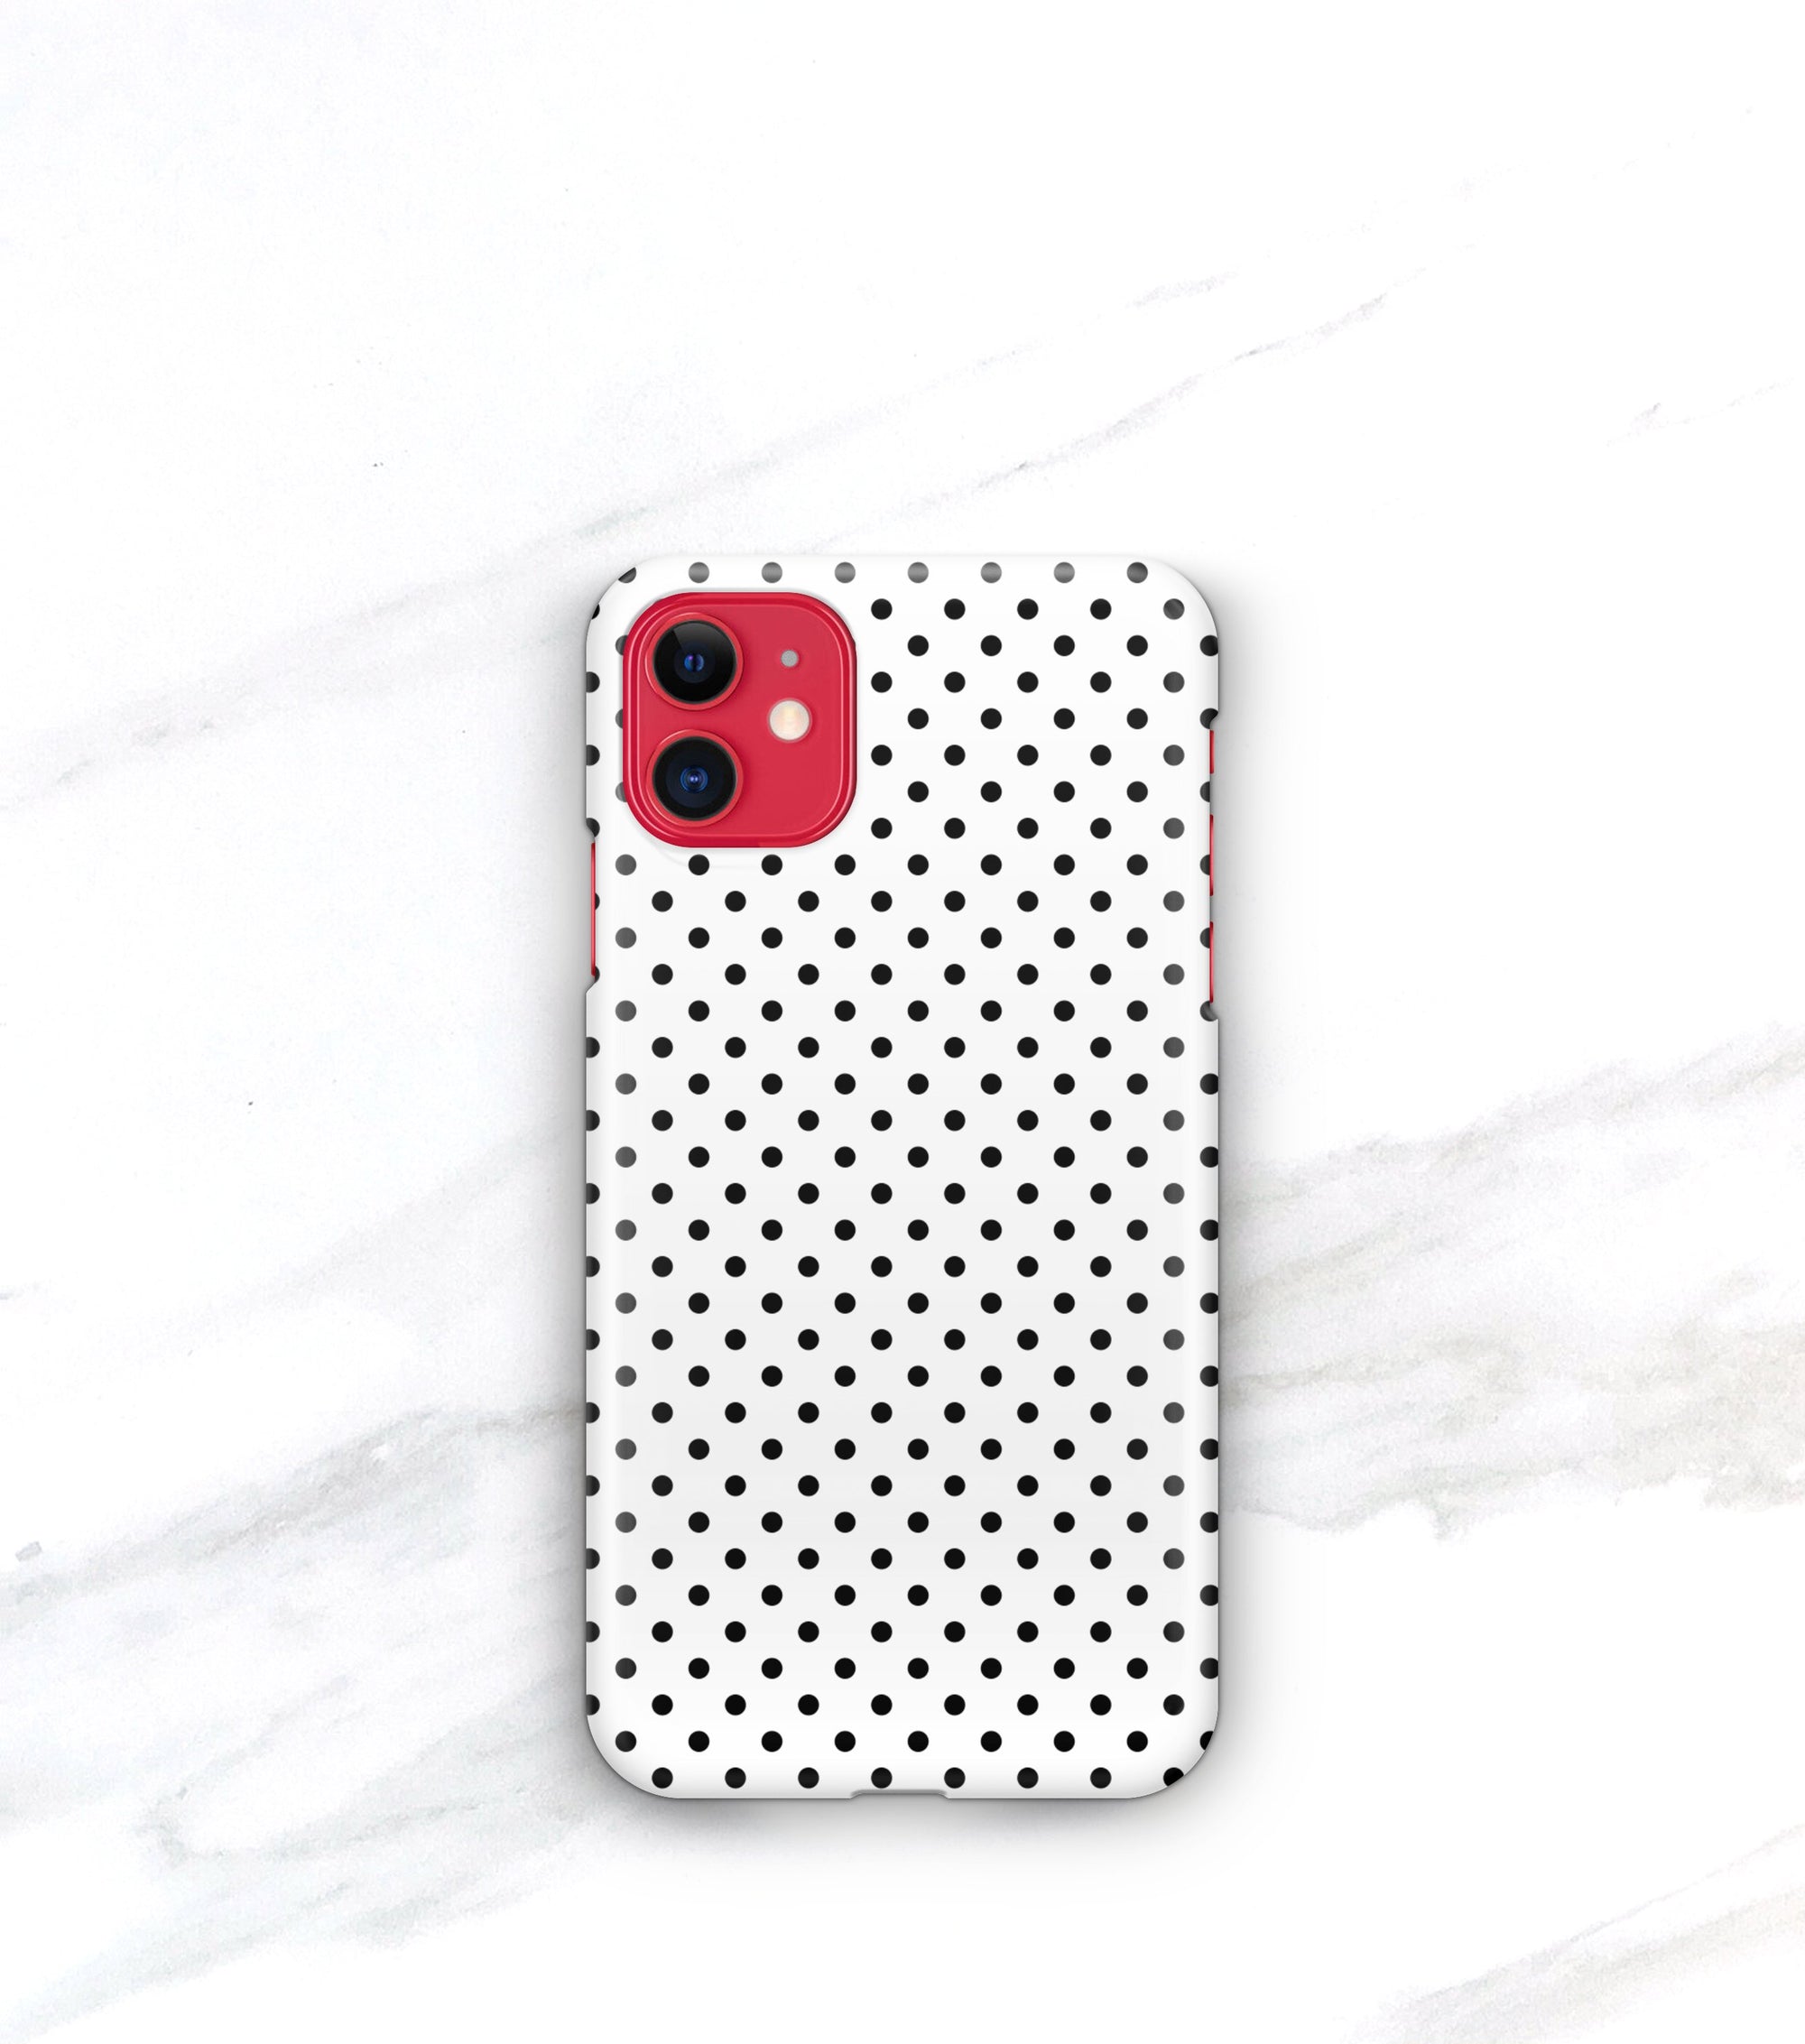 Polkadot pattern case for iphone 11 pro max